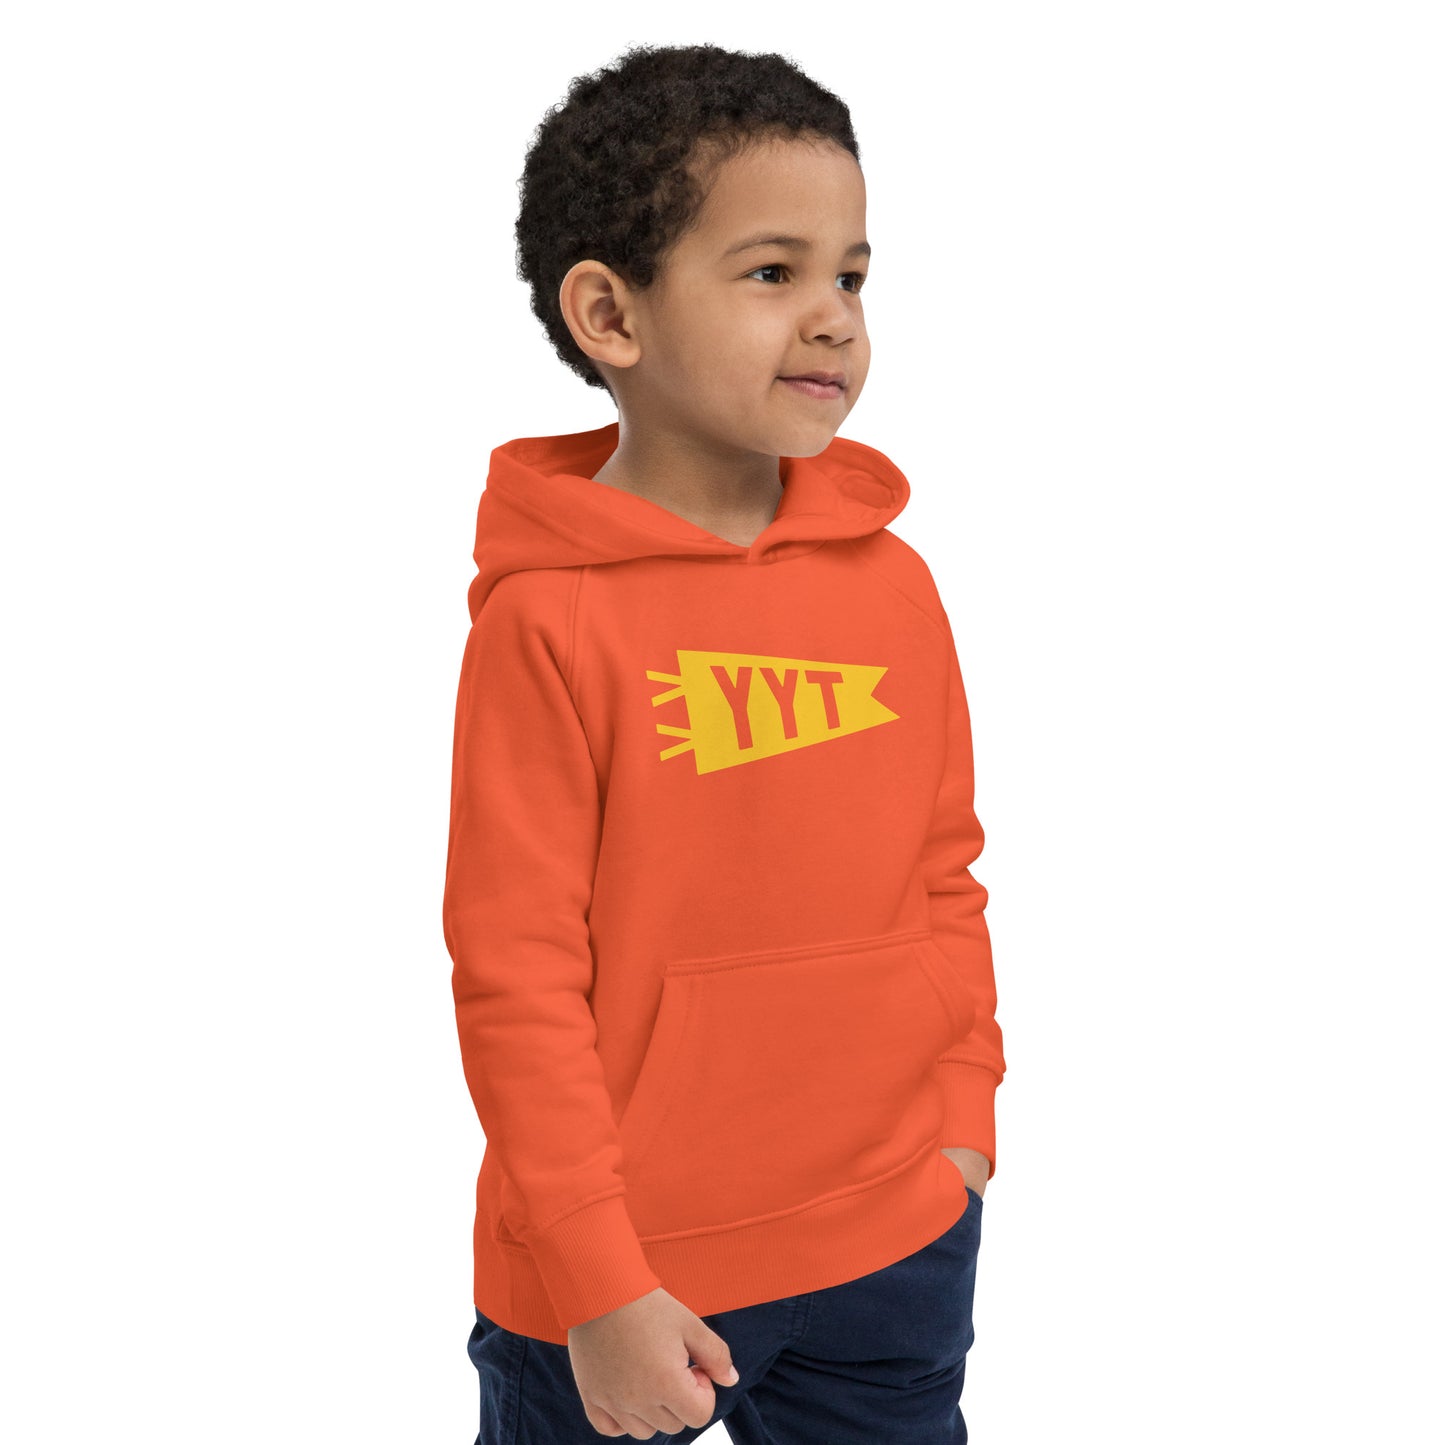 Kid's Sustainable Hoodie - Yellow Graphic • YYT St. John's • YHM Designs - Image 13